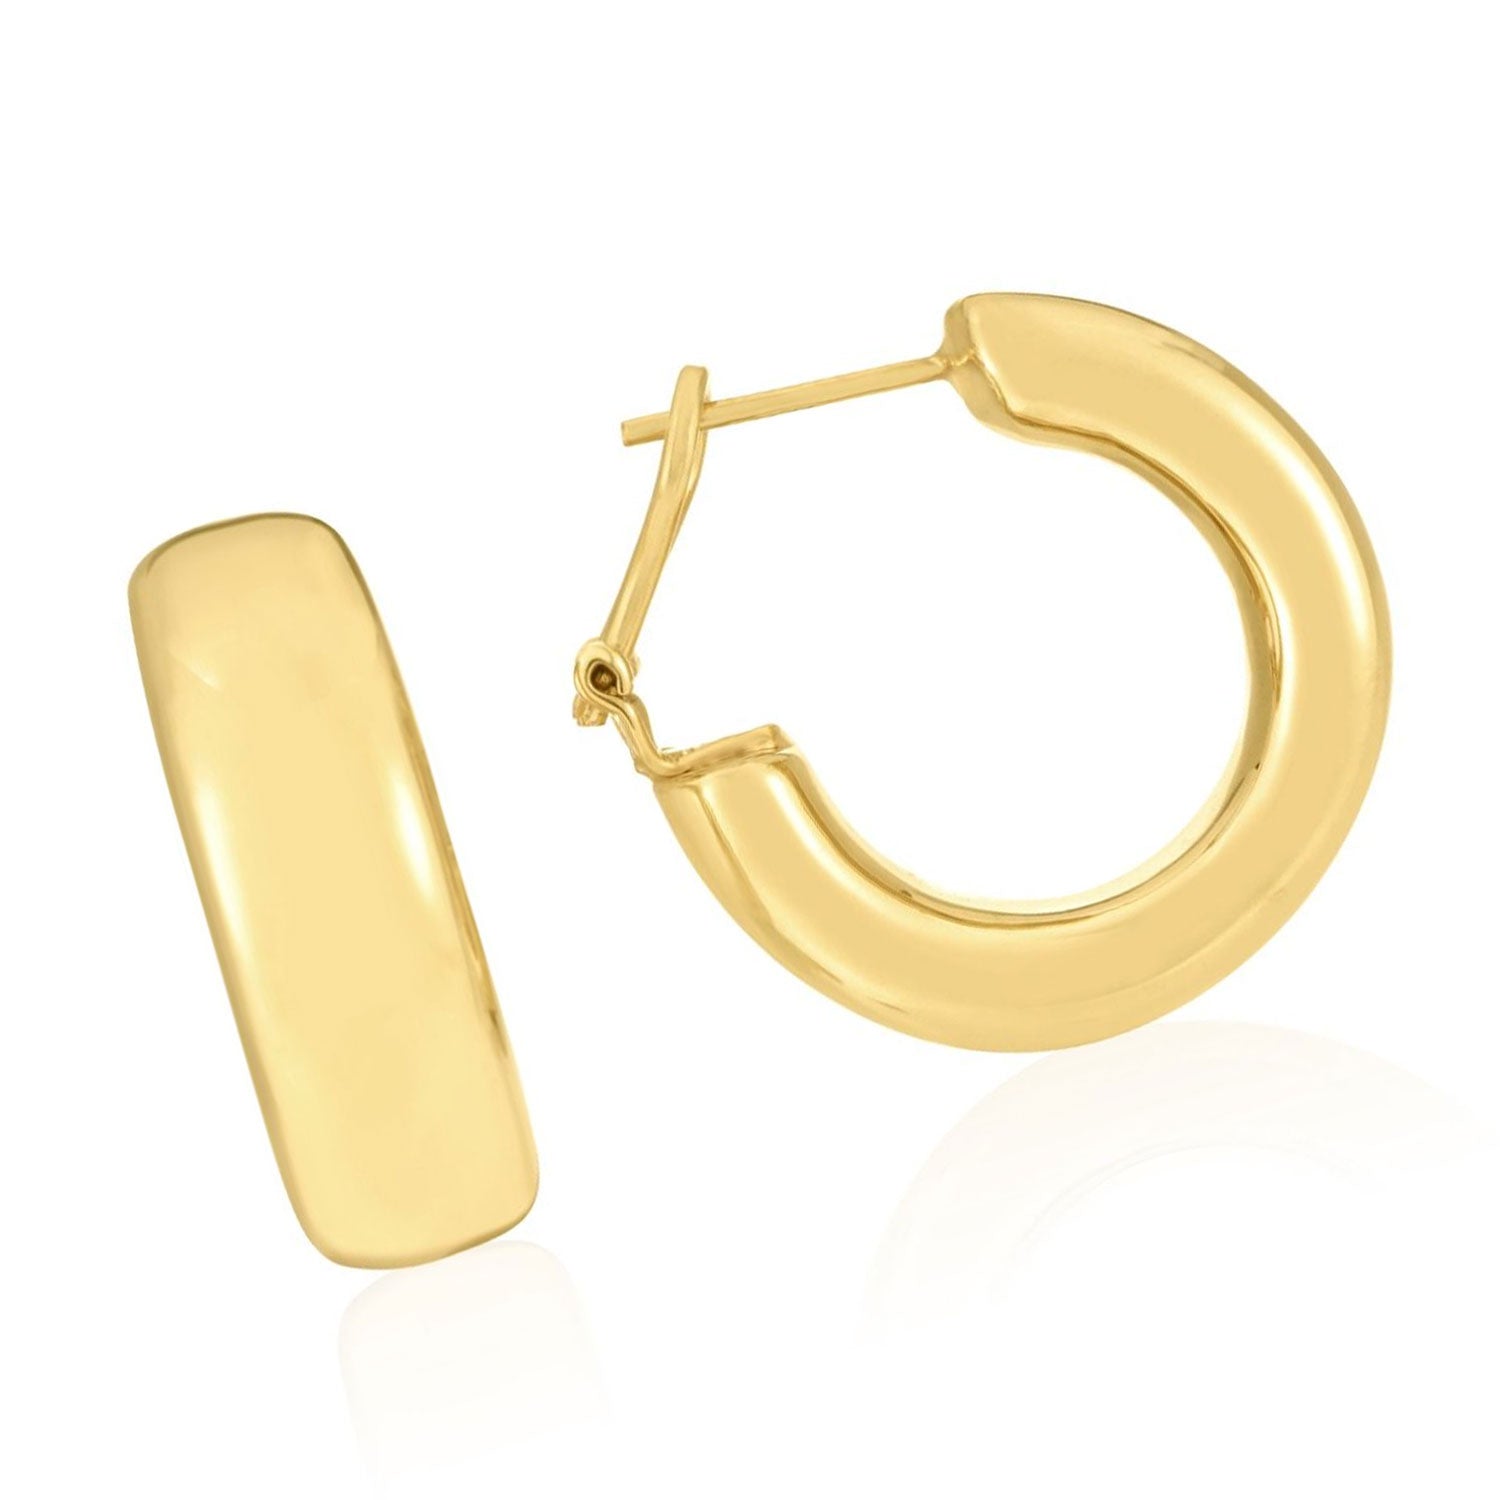 14K Yellow Gold Large C-Hoop Earrings with Polished Finish and Omega ...